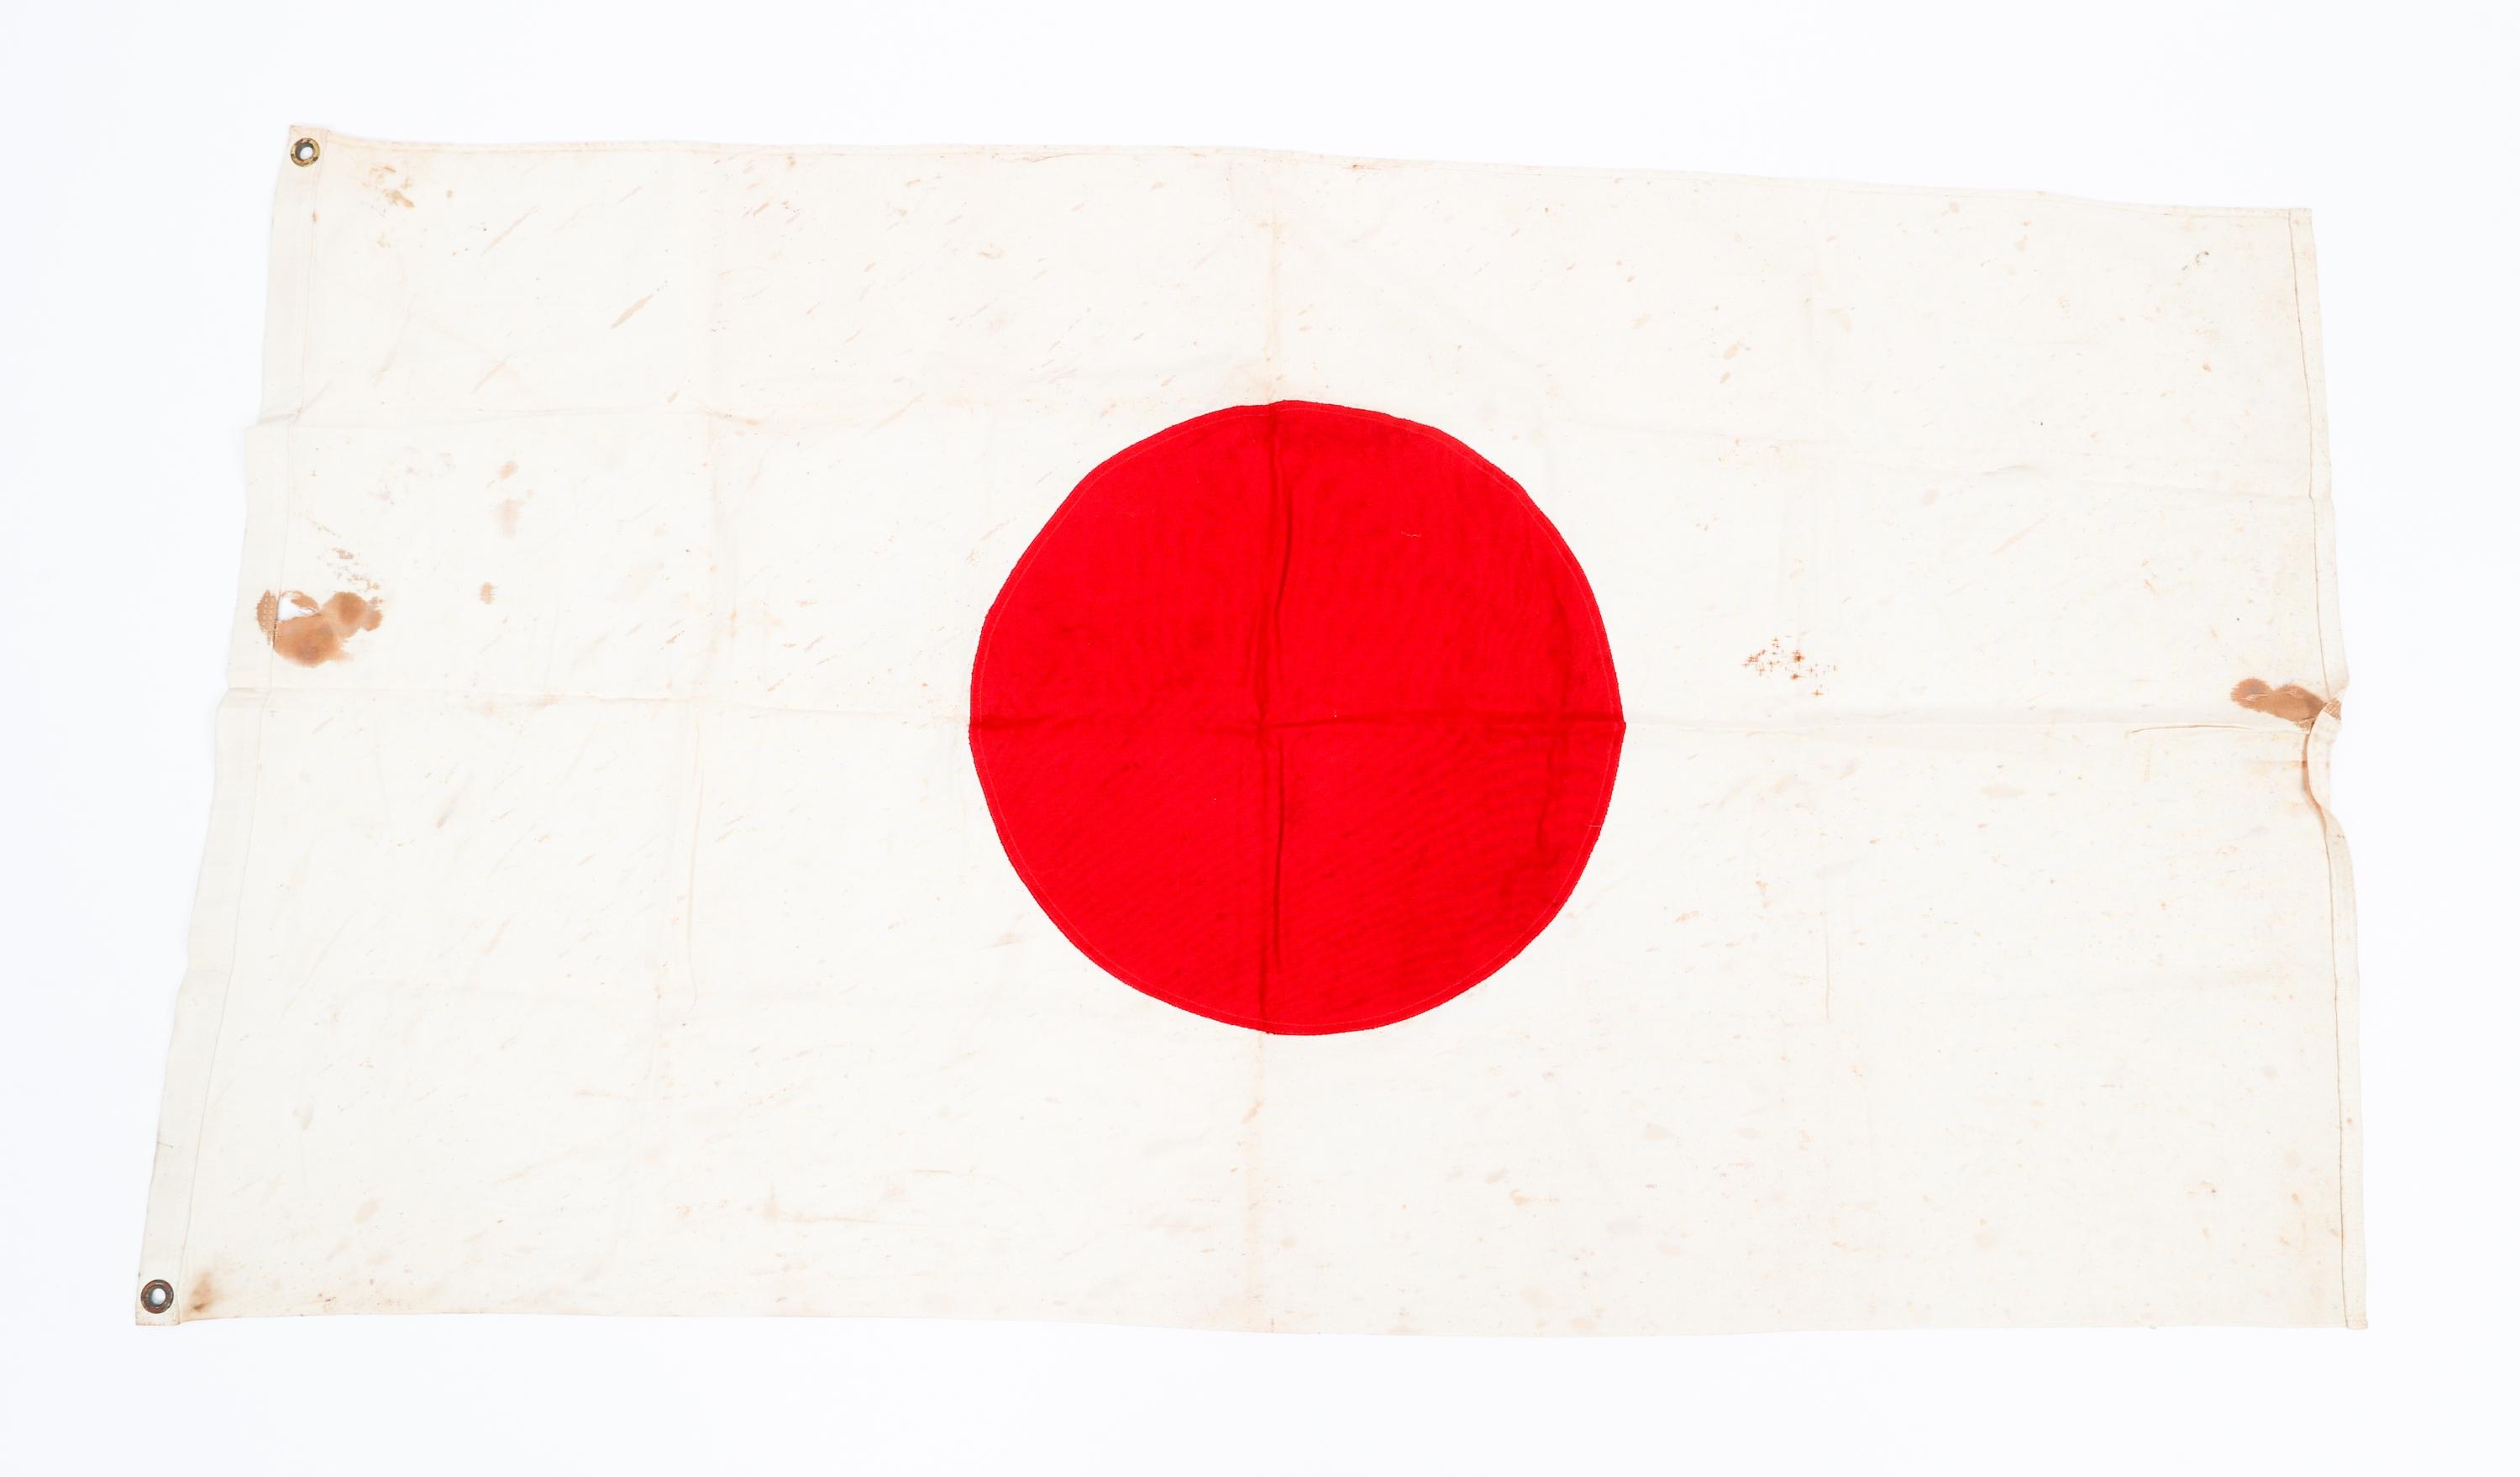 WWII - COLD WAR US & JAPANESE FLAGS